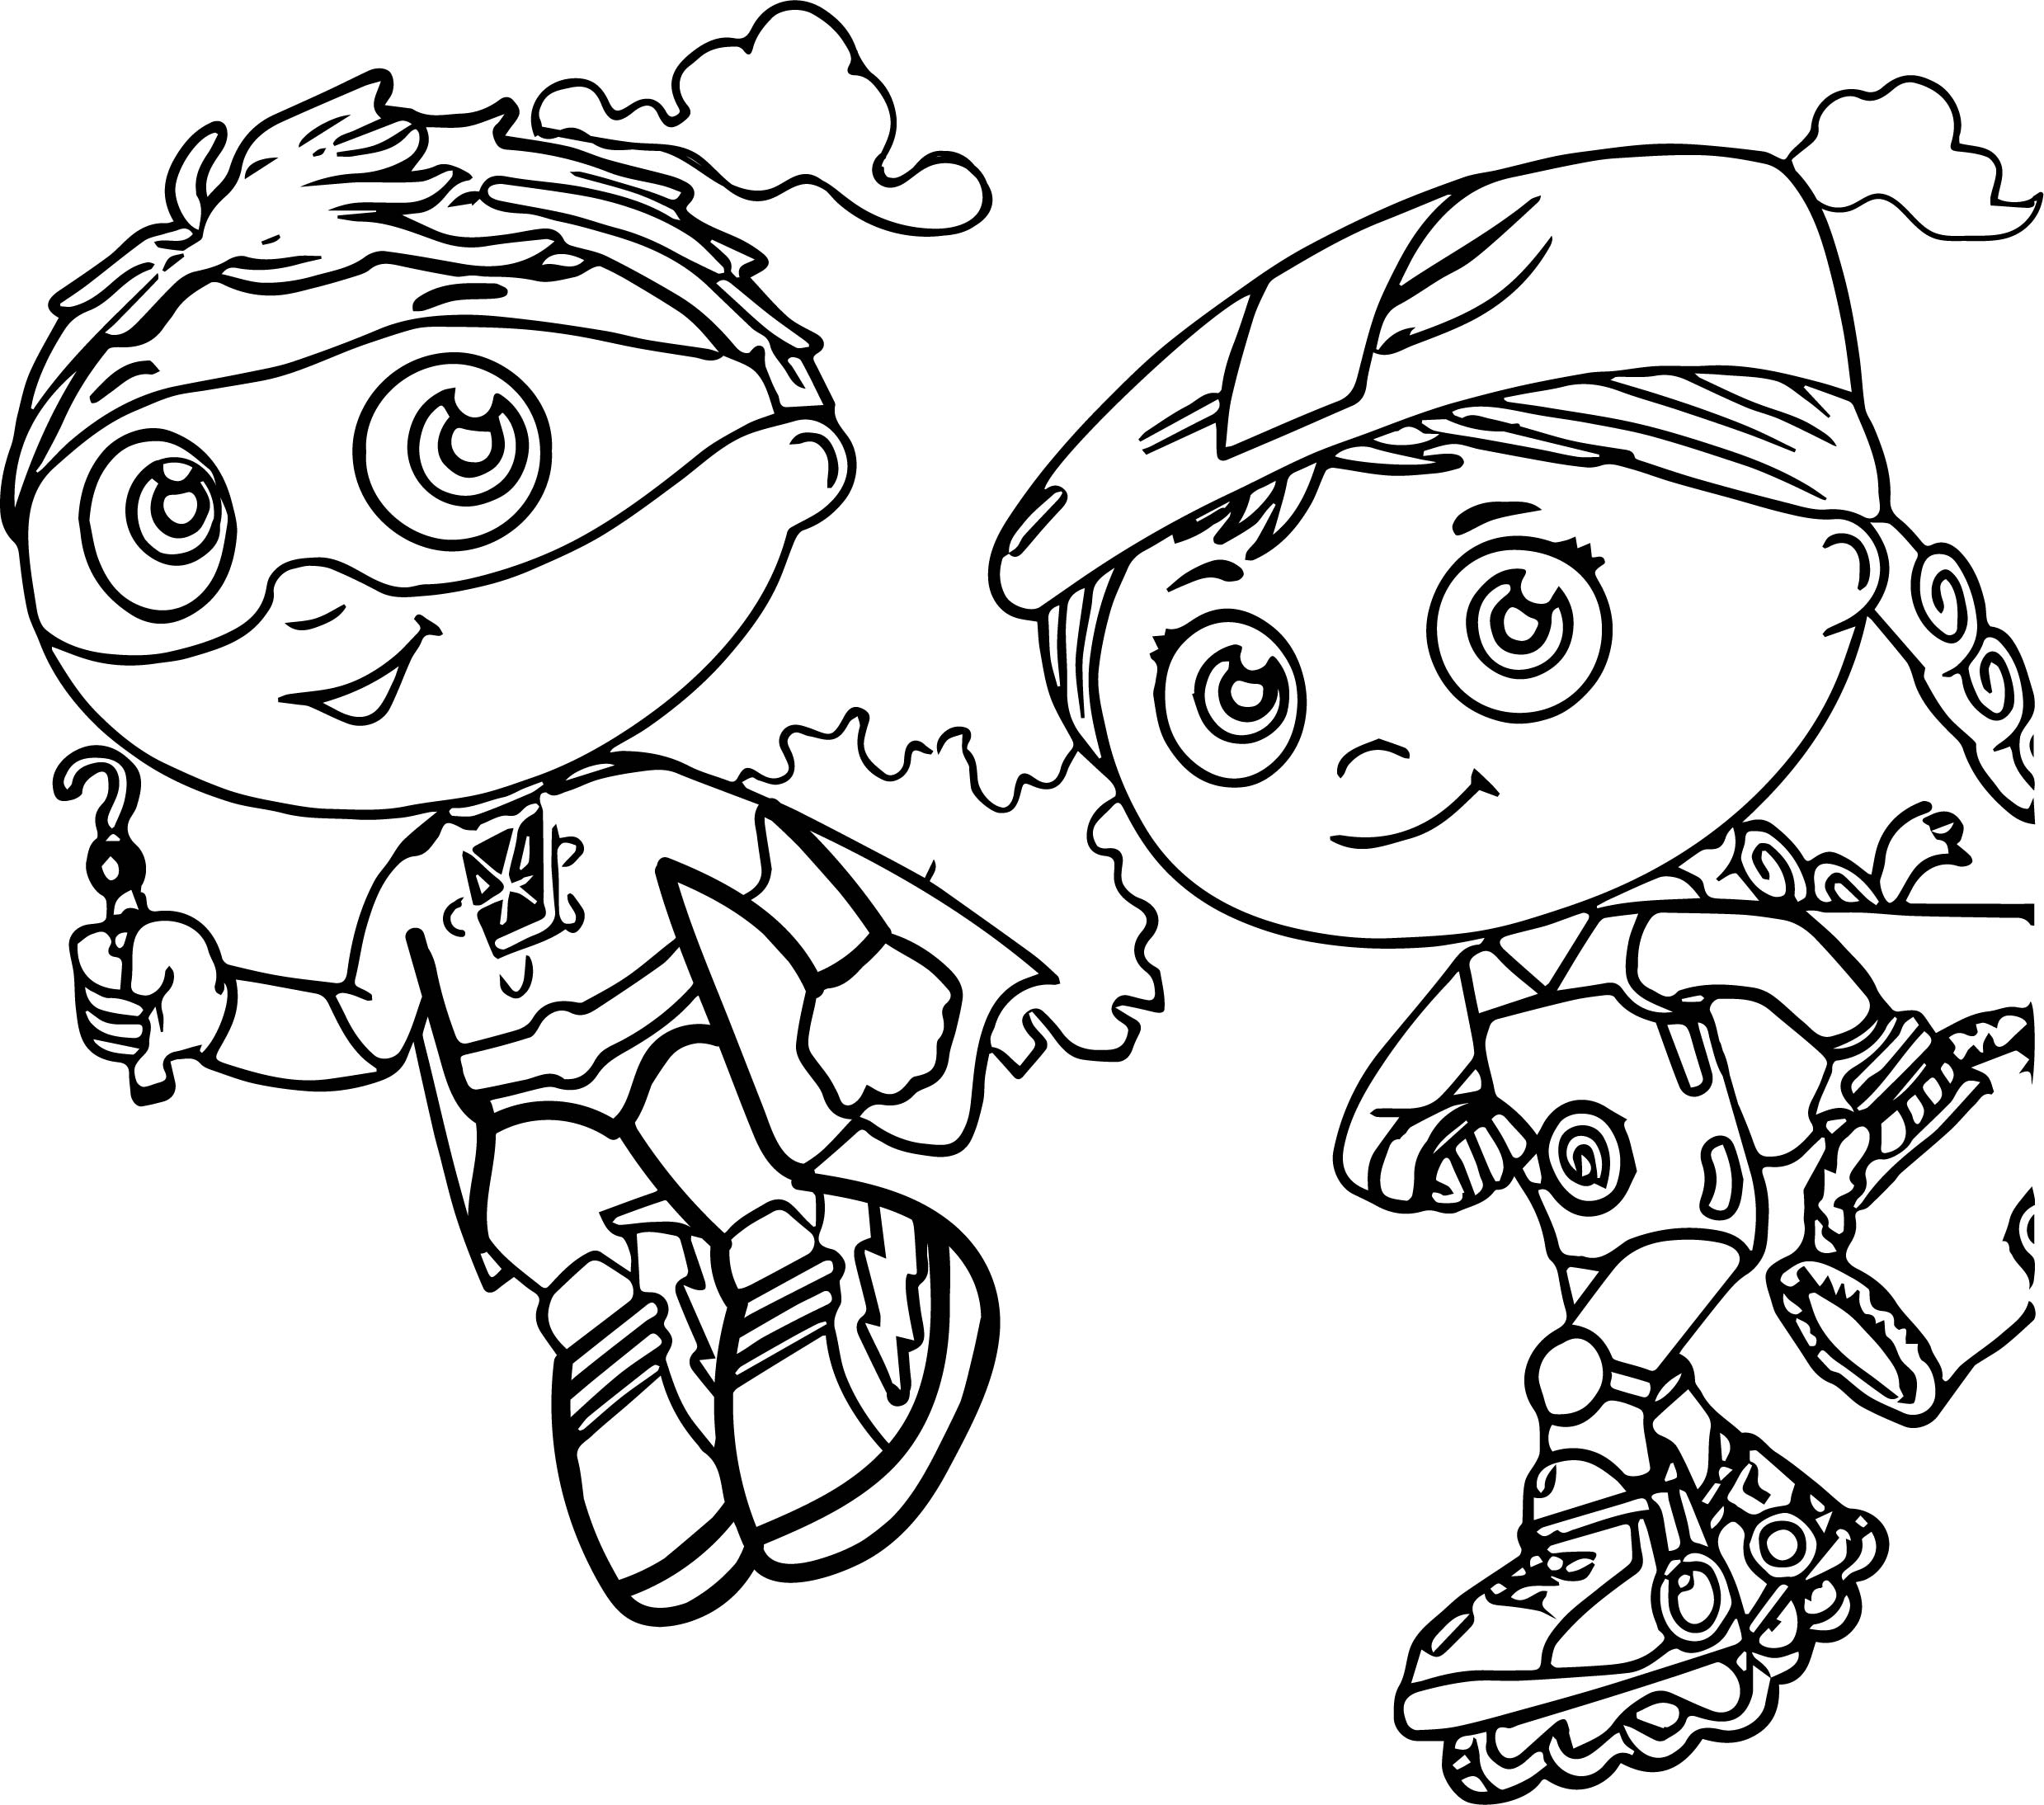 Super Why Coloring Pages 9